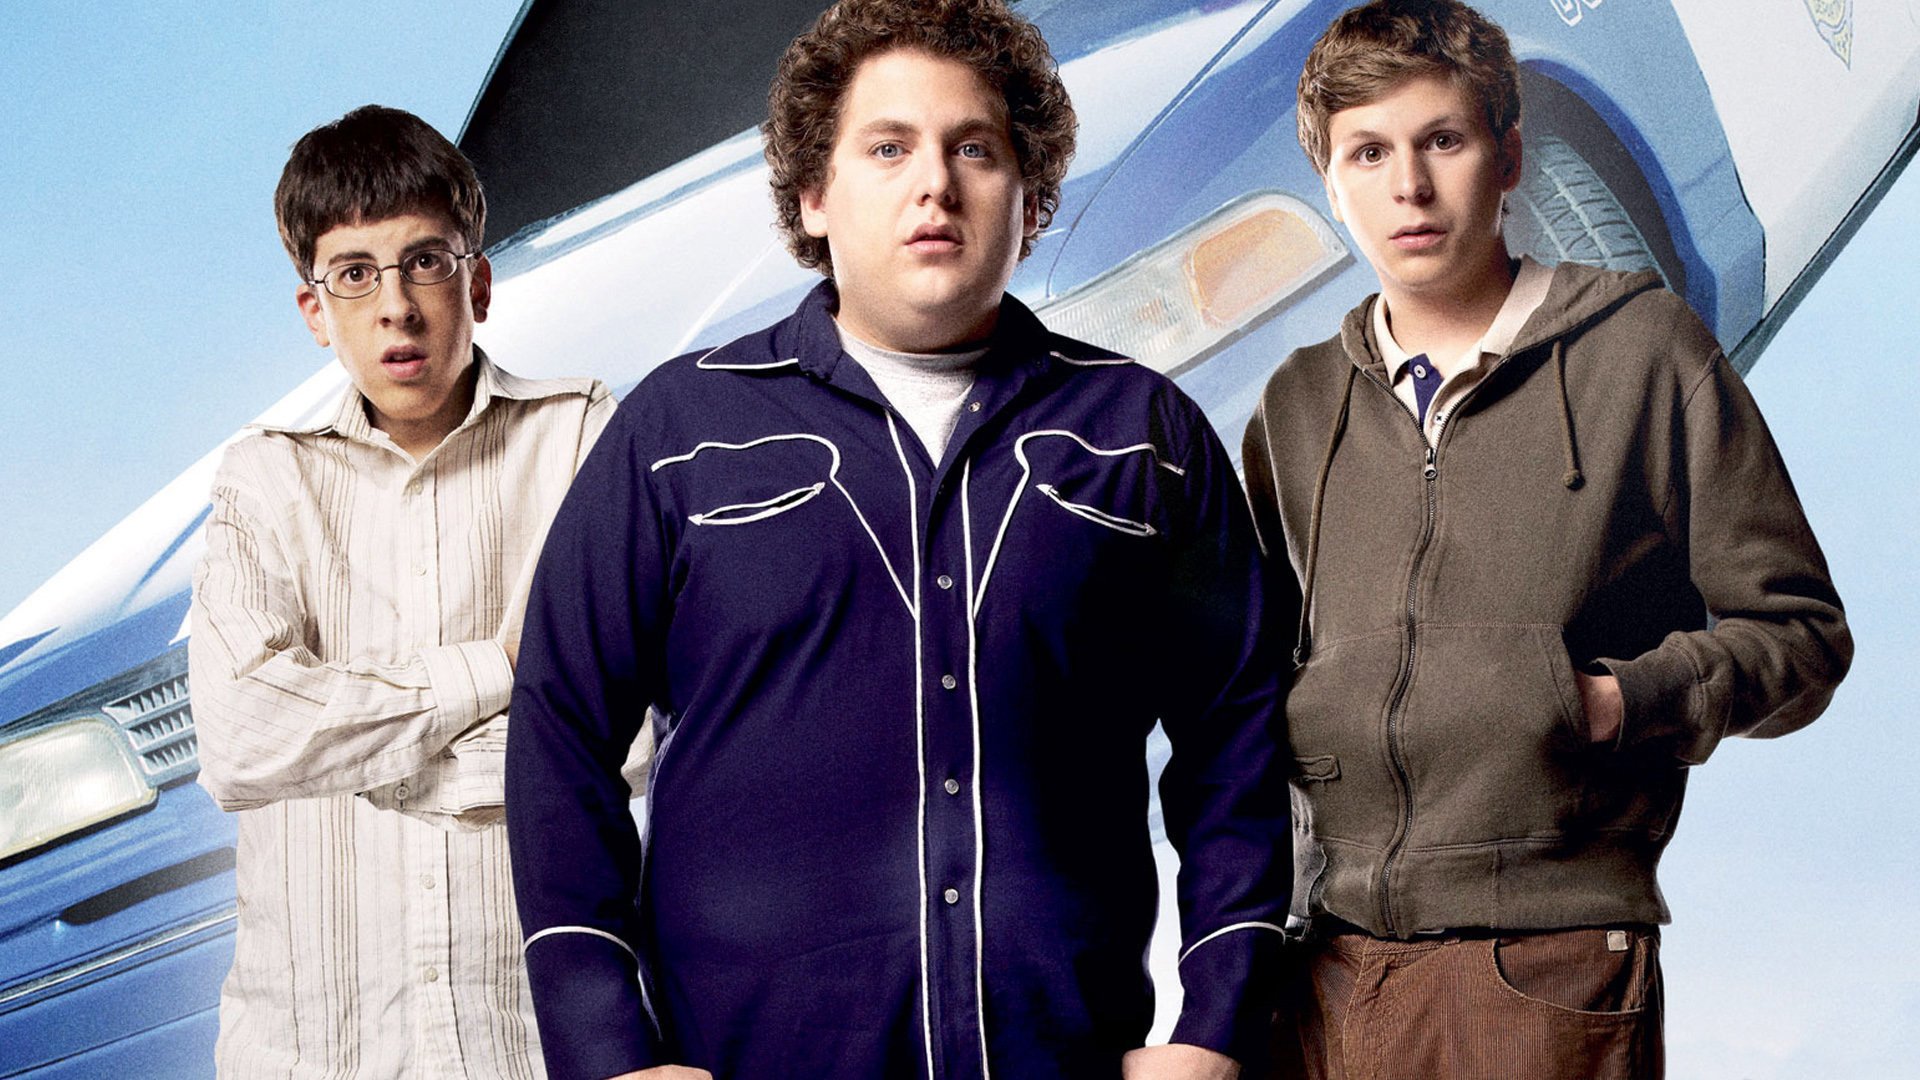 superbad hd wallpaper background image 1920x1080 id on superbad movie wallpapers